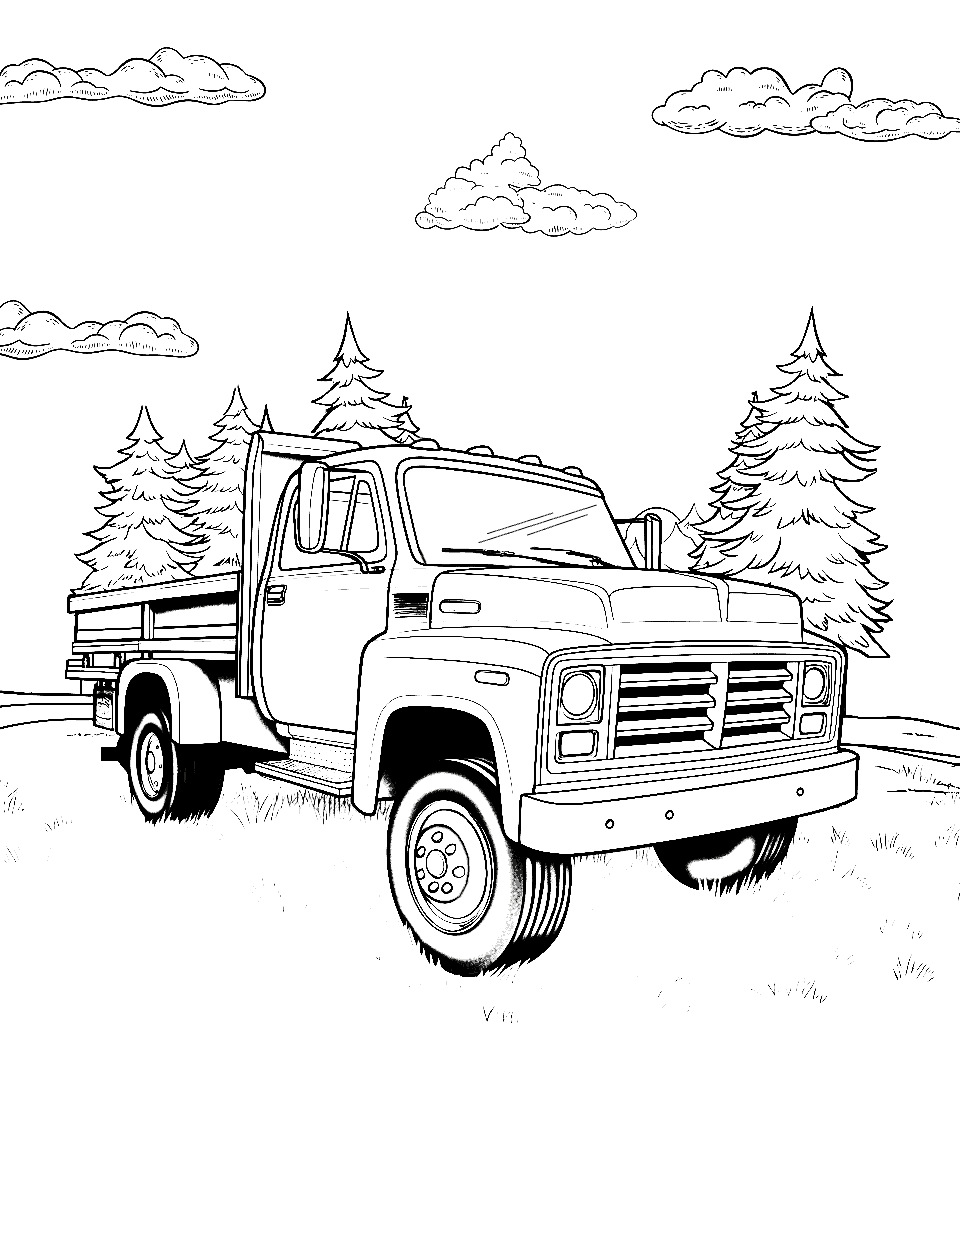 Chevy in Meadow Coloring Page - A Chevy truck parked under the clouds in a meadow filled with greenery.